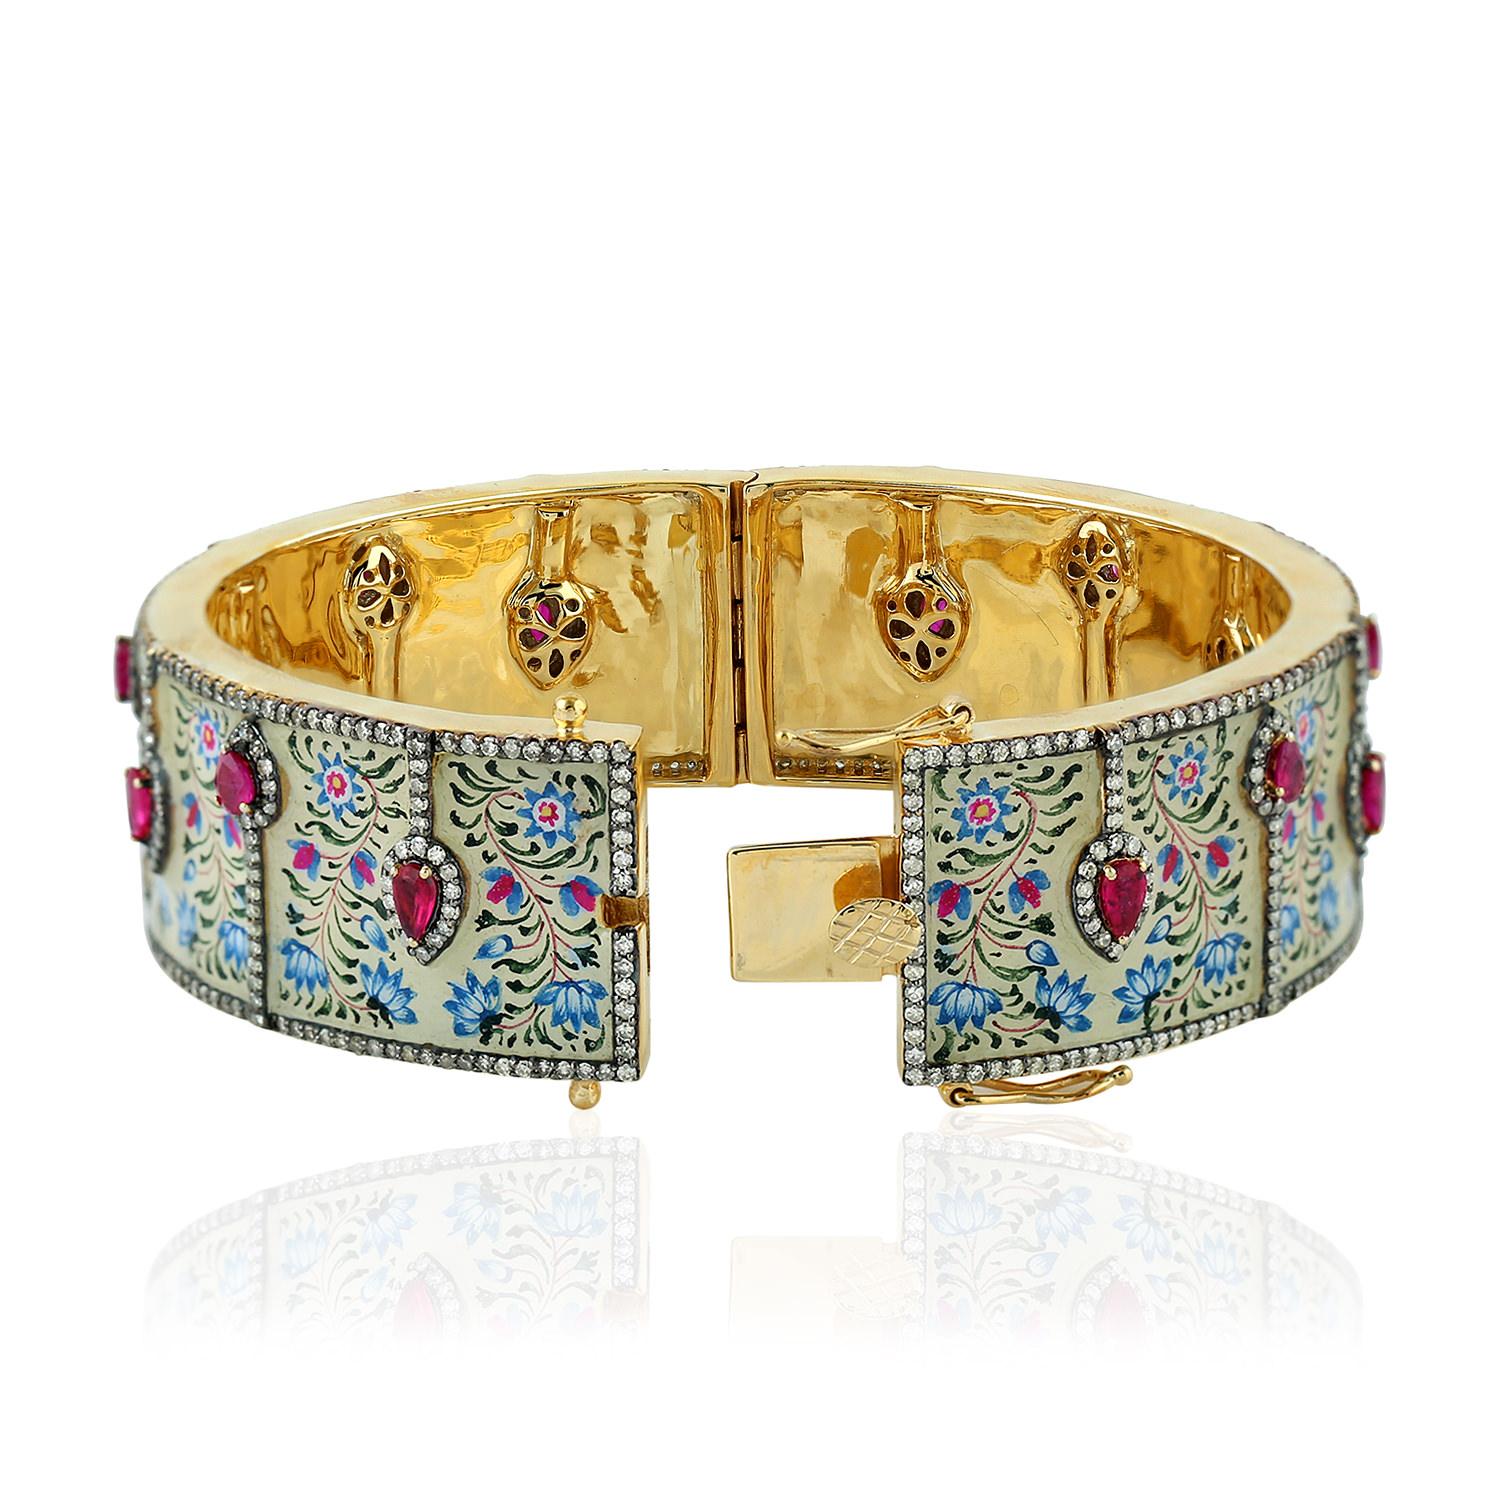 The pieces in Maharaja collection features unique hand painted miniature art set with 18K gold, sterling silver & 4.18 carats diamonds.  This beautiful bangle is filled with bright 2.45 carats of rubies that contrast the enamel art. Clasp